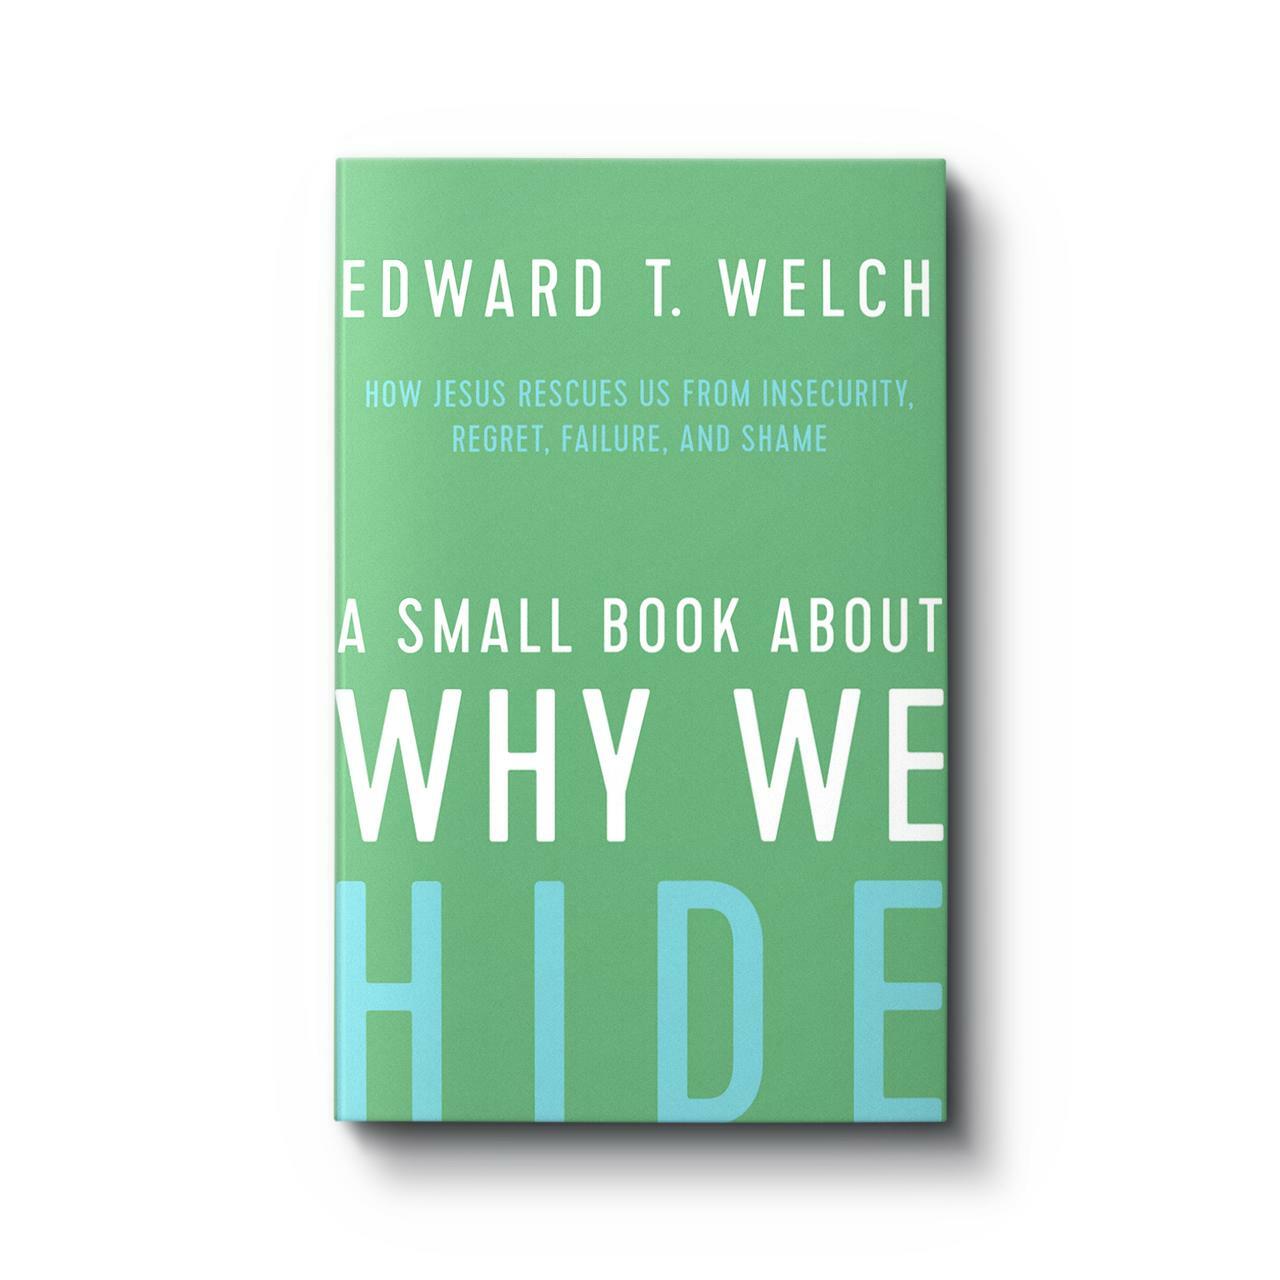 A SMALL BOOK ABOUT WHY WE HIDE Edward T Welch